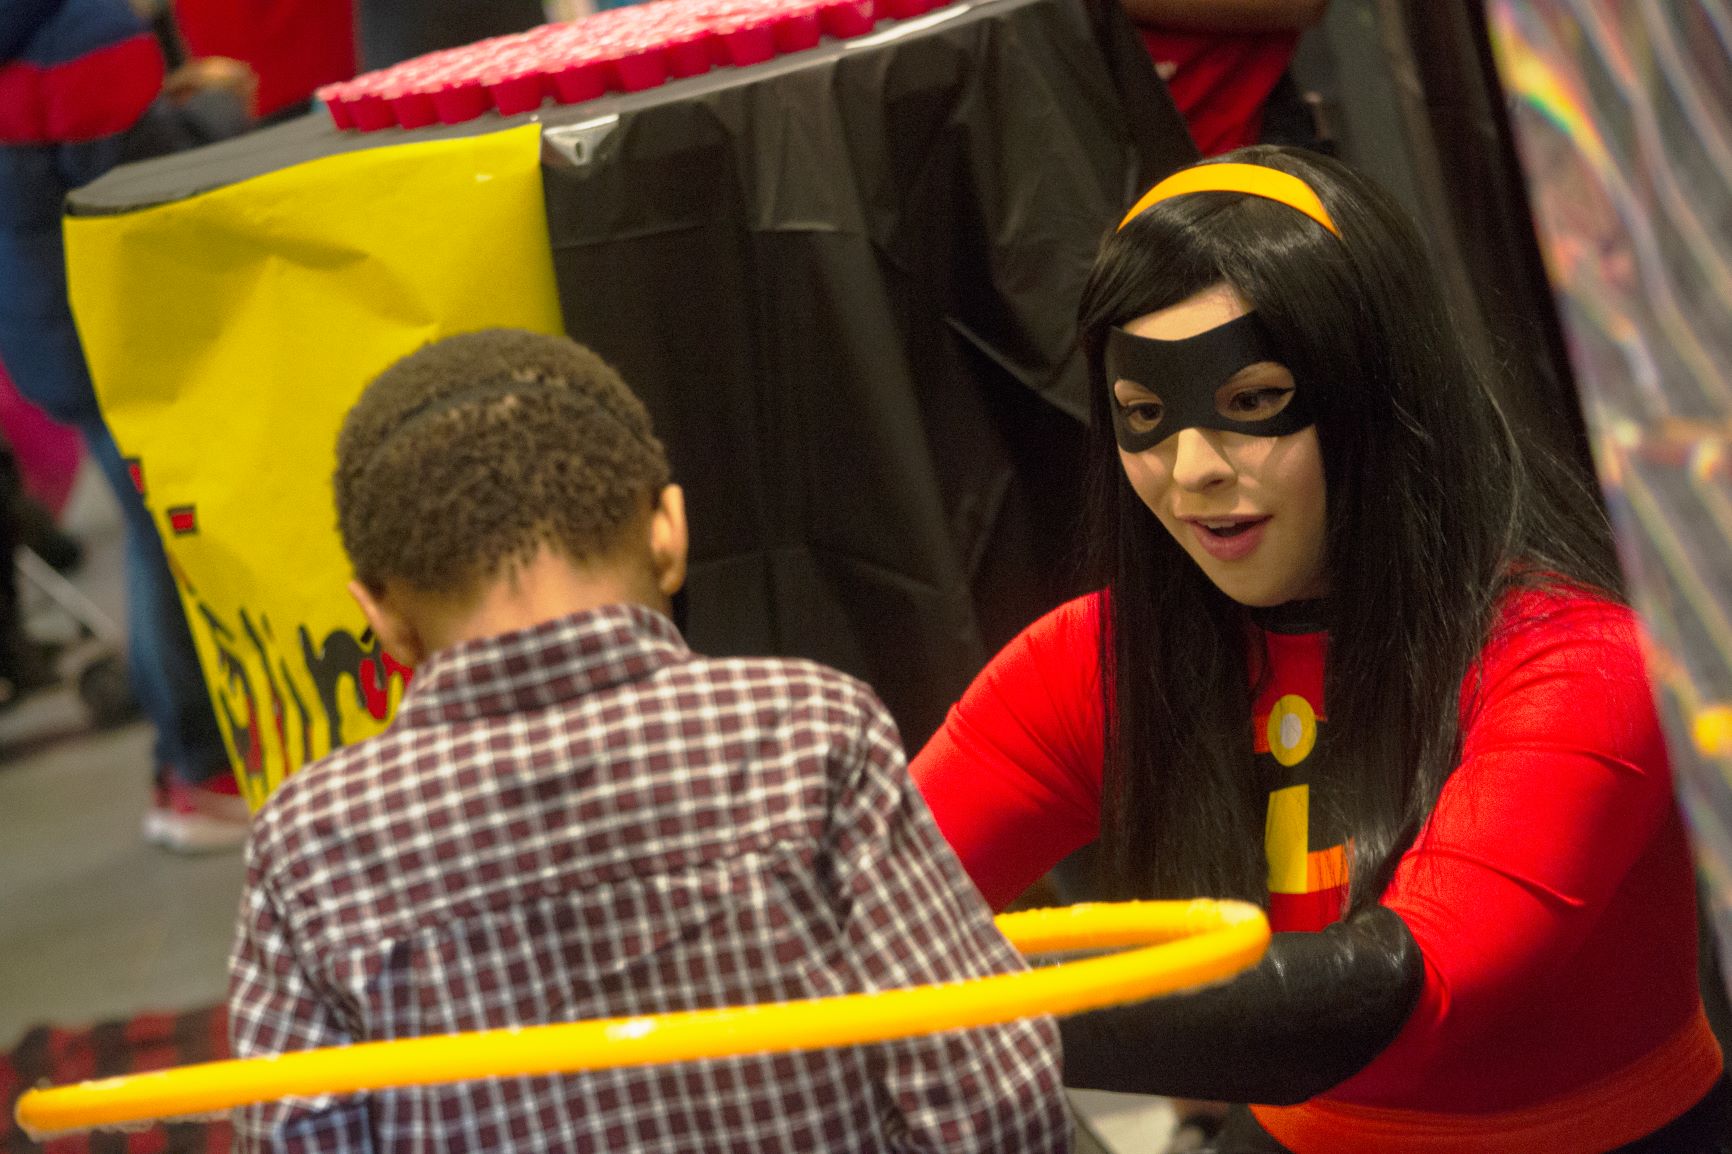 A Baylor Law student dressed as a character from Disney's "The Incredibles" helps small boy with hula-hoop.